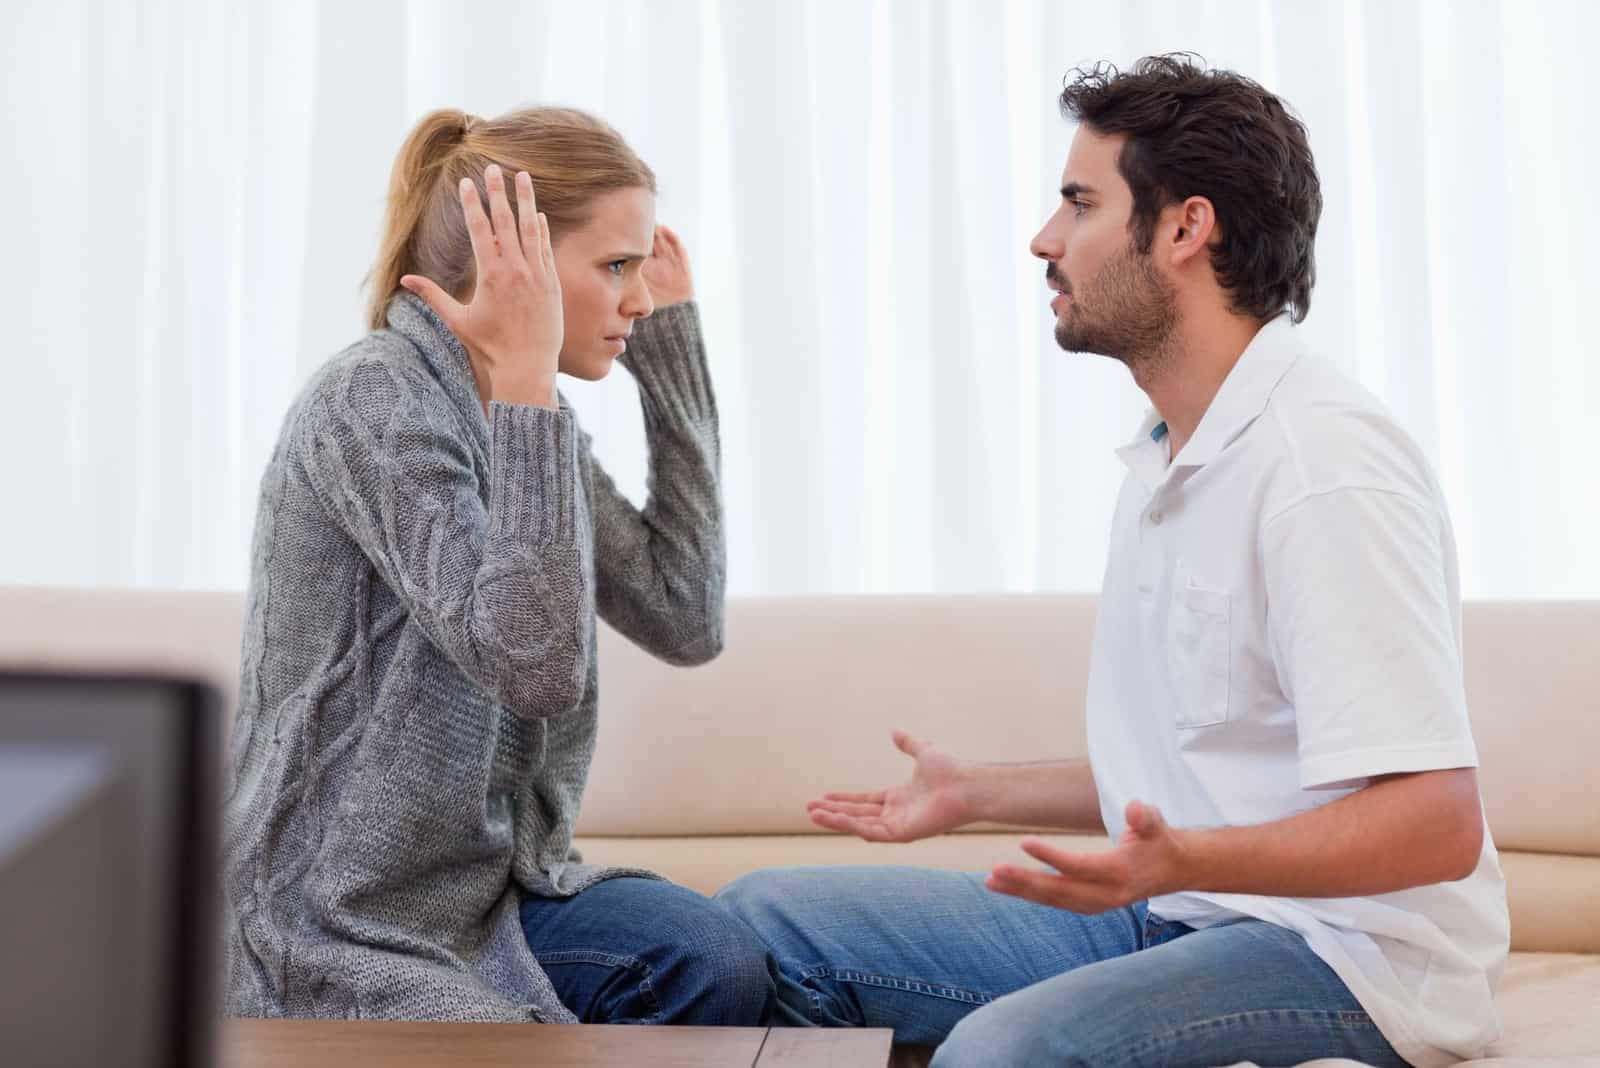 angry blond woman arguing with man on the couch